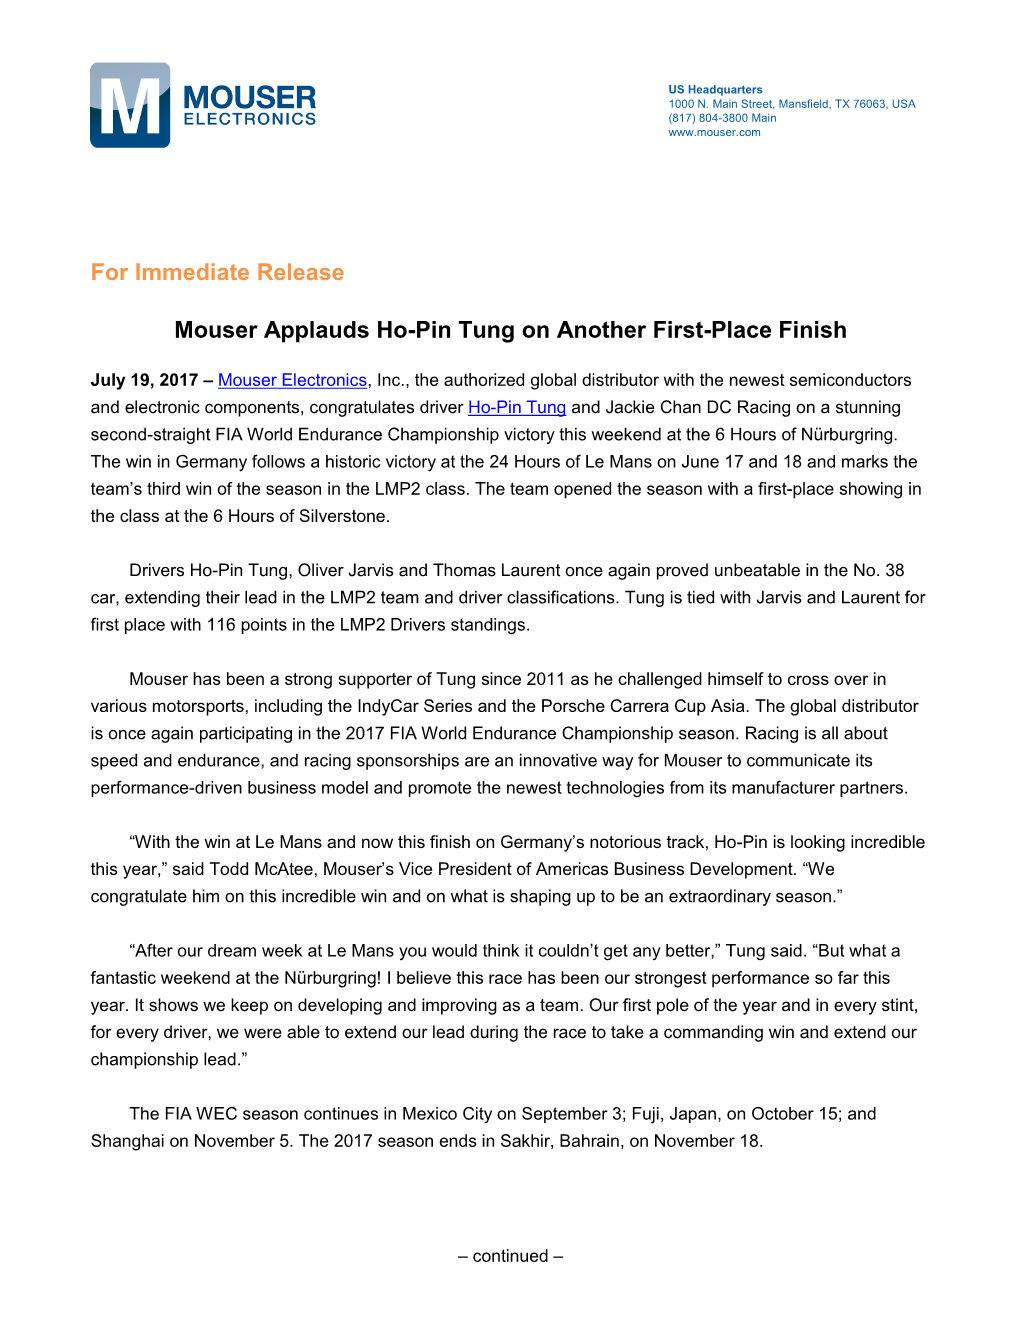 Mouser Applauds Ho-Pin Tung on Another First-Place Finish